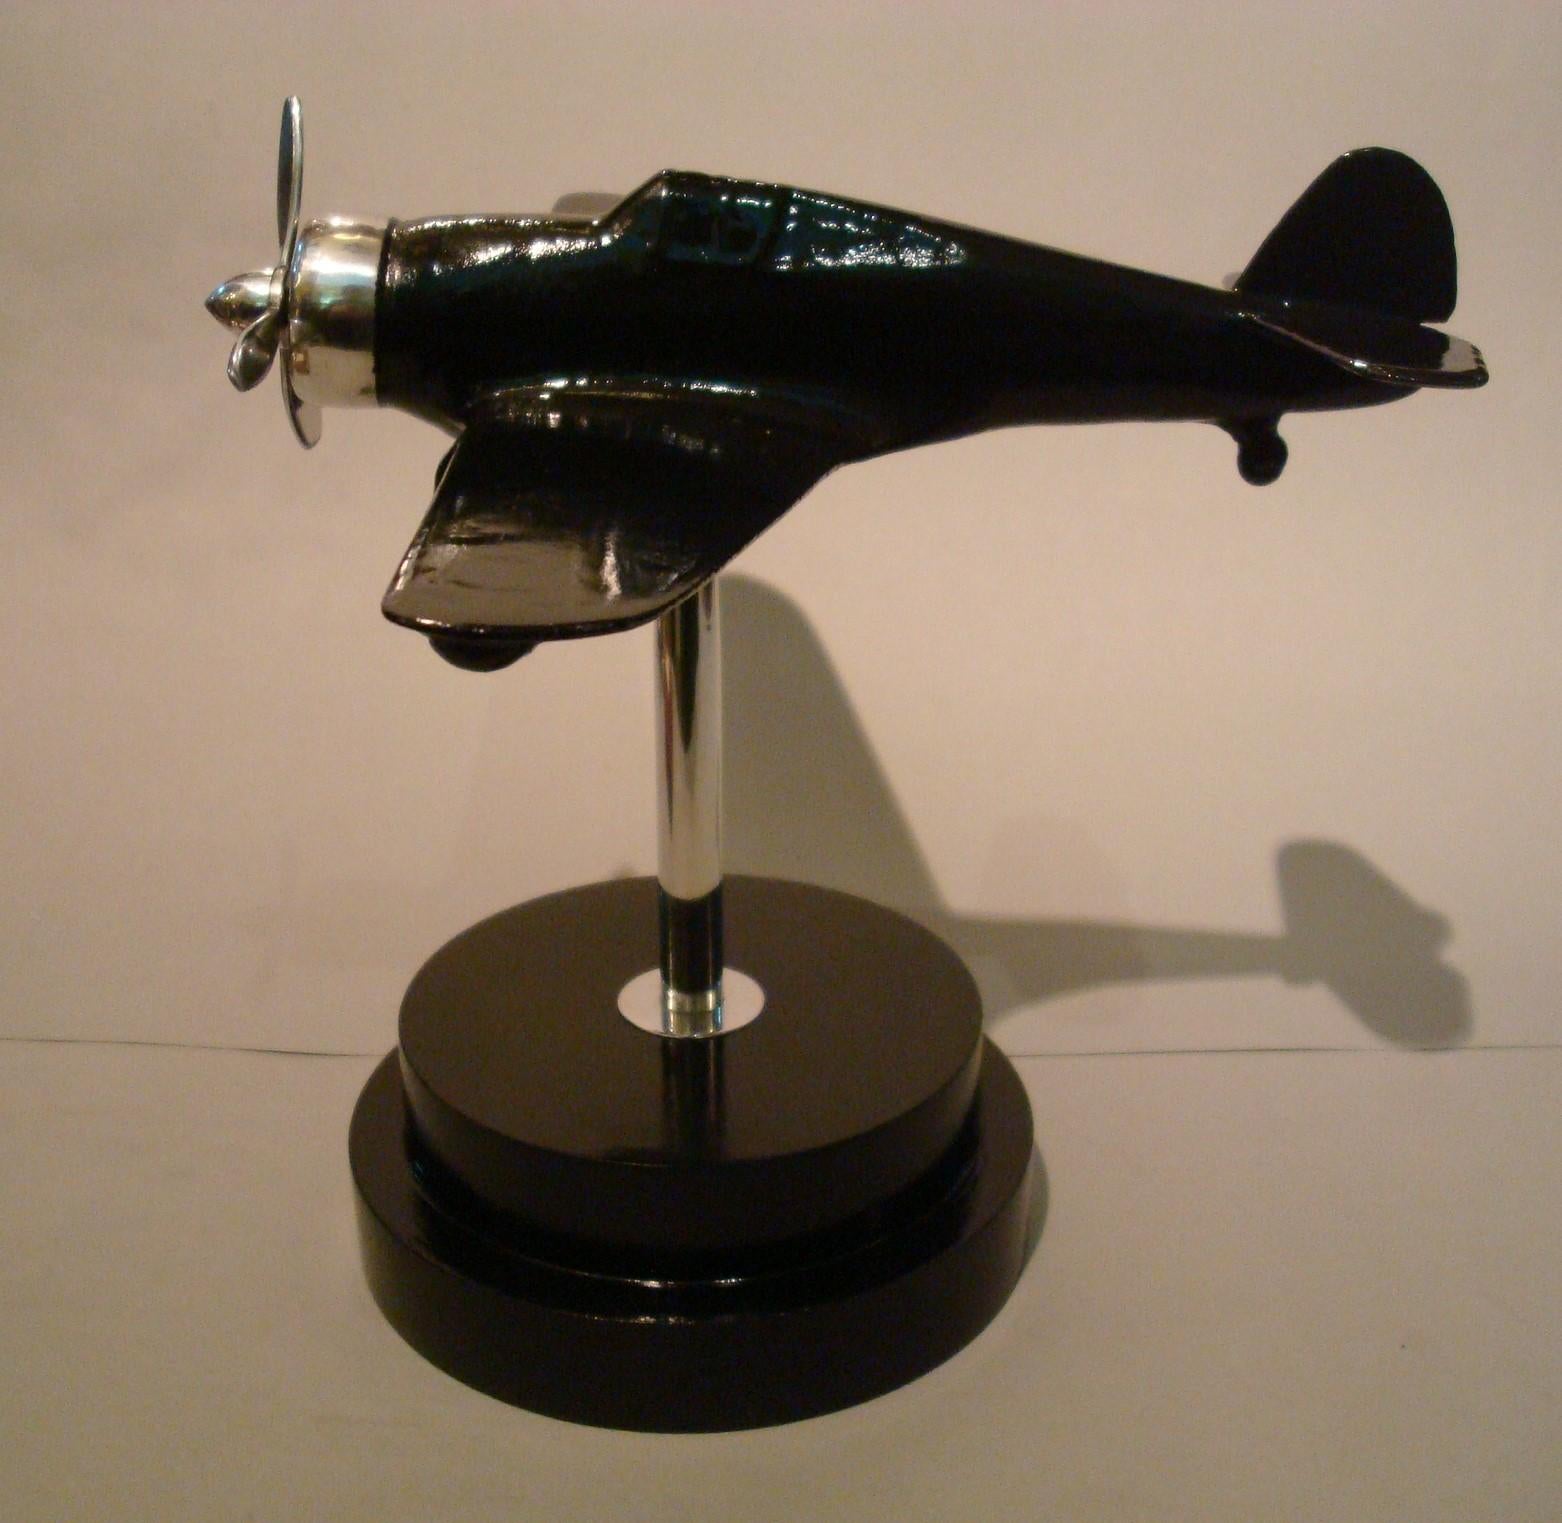 Art Deco Airplane Fighter Desk Stand Model, 1930s